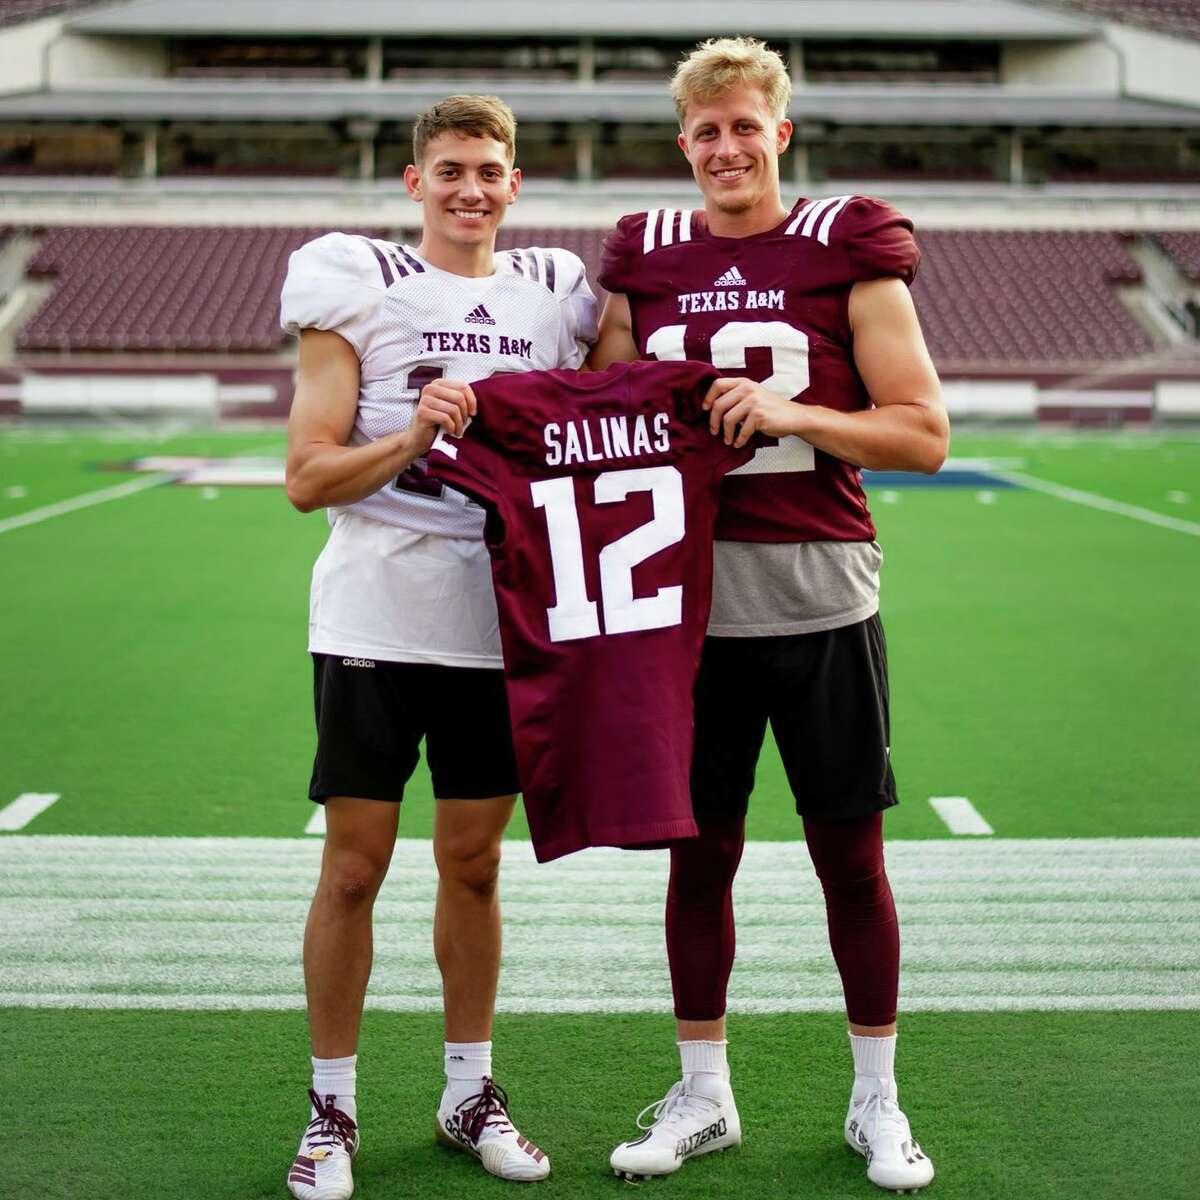 Texas A&M head yell leader Memo Salinas receives his 12th Man jersey on Sept. 2, 2021 from 12th Man Connor Choate.